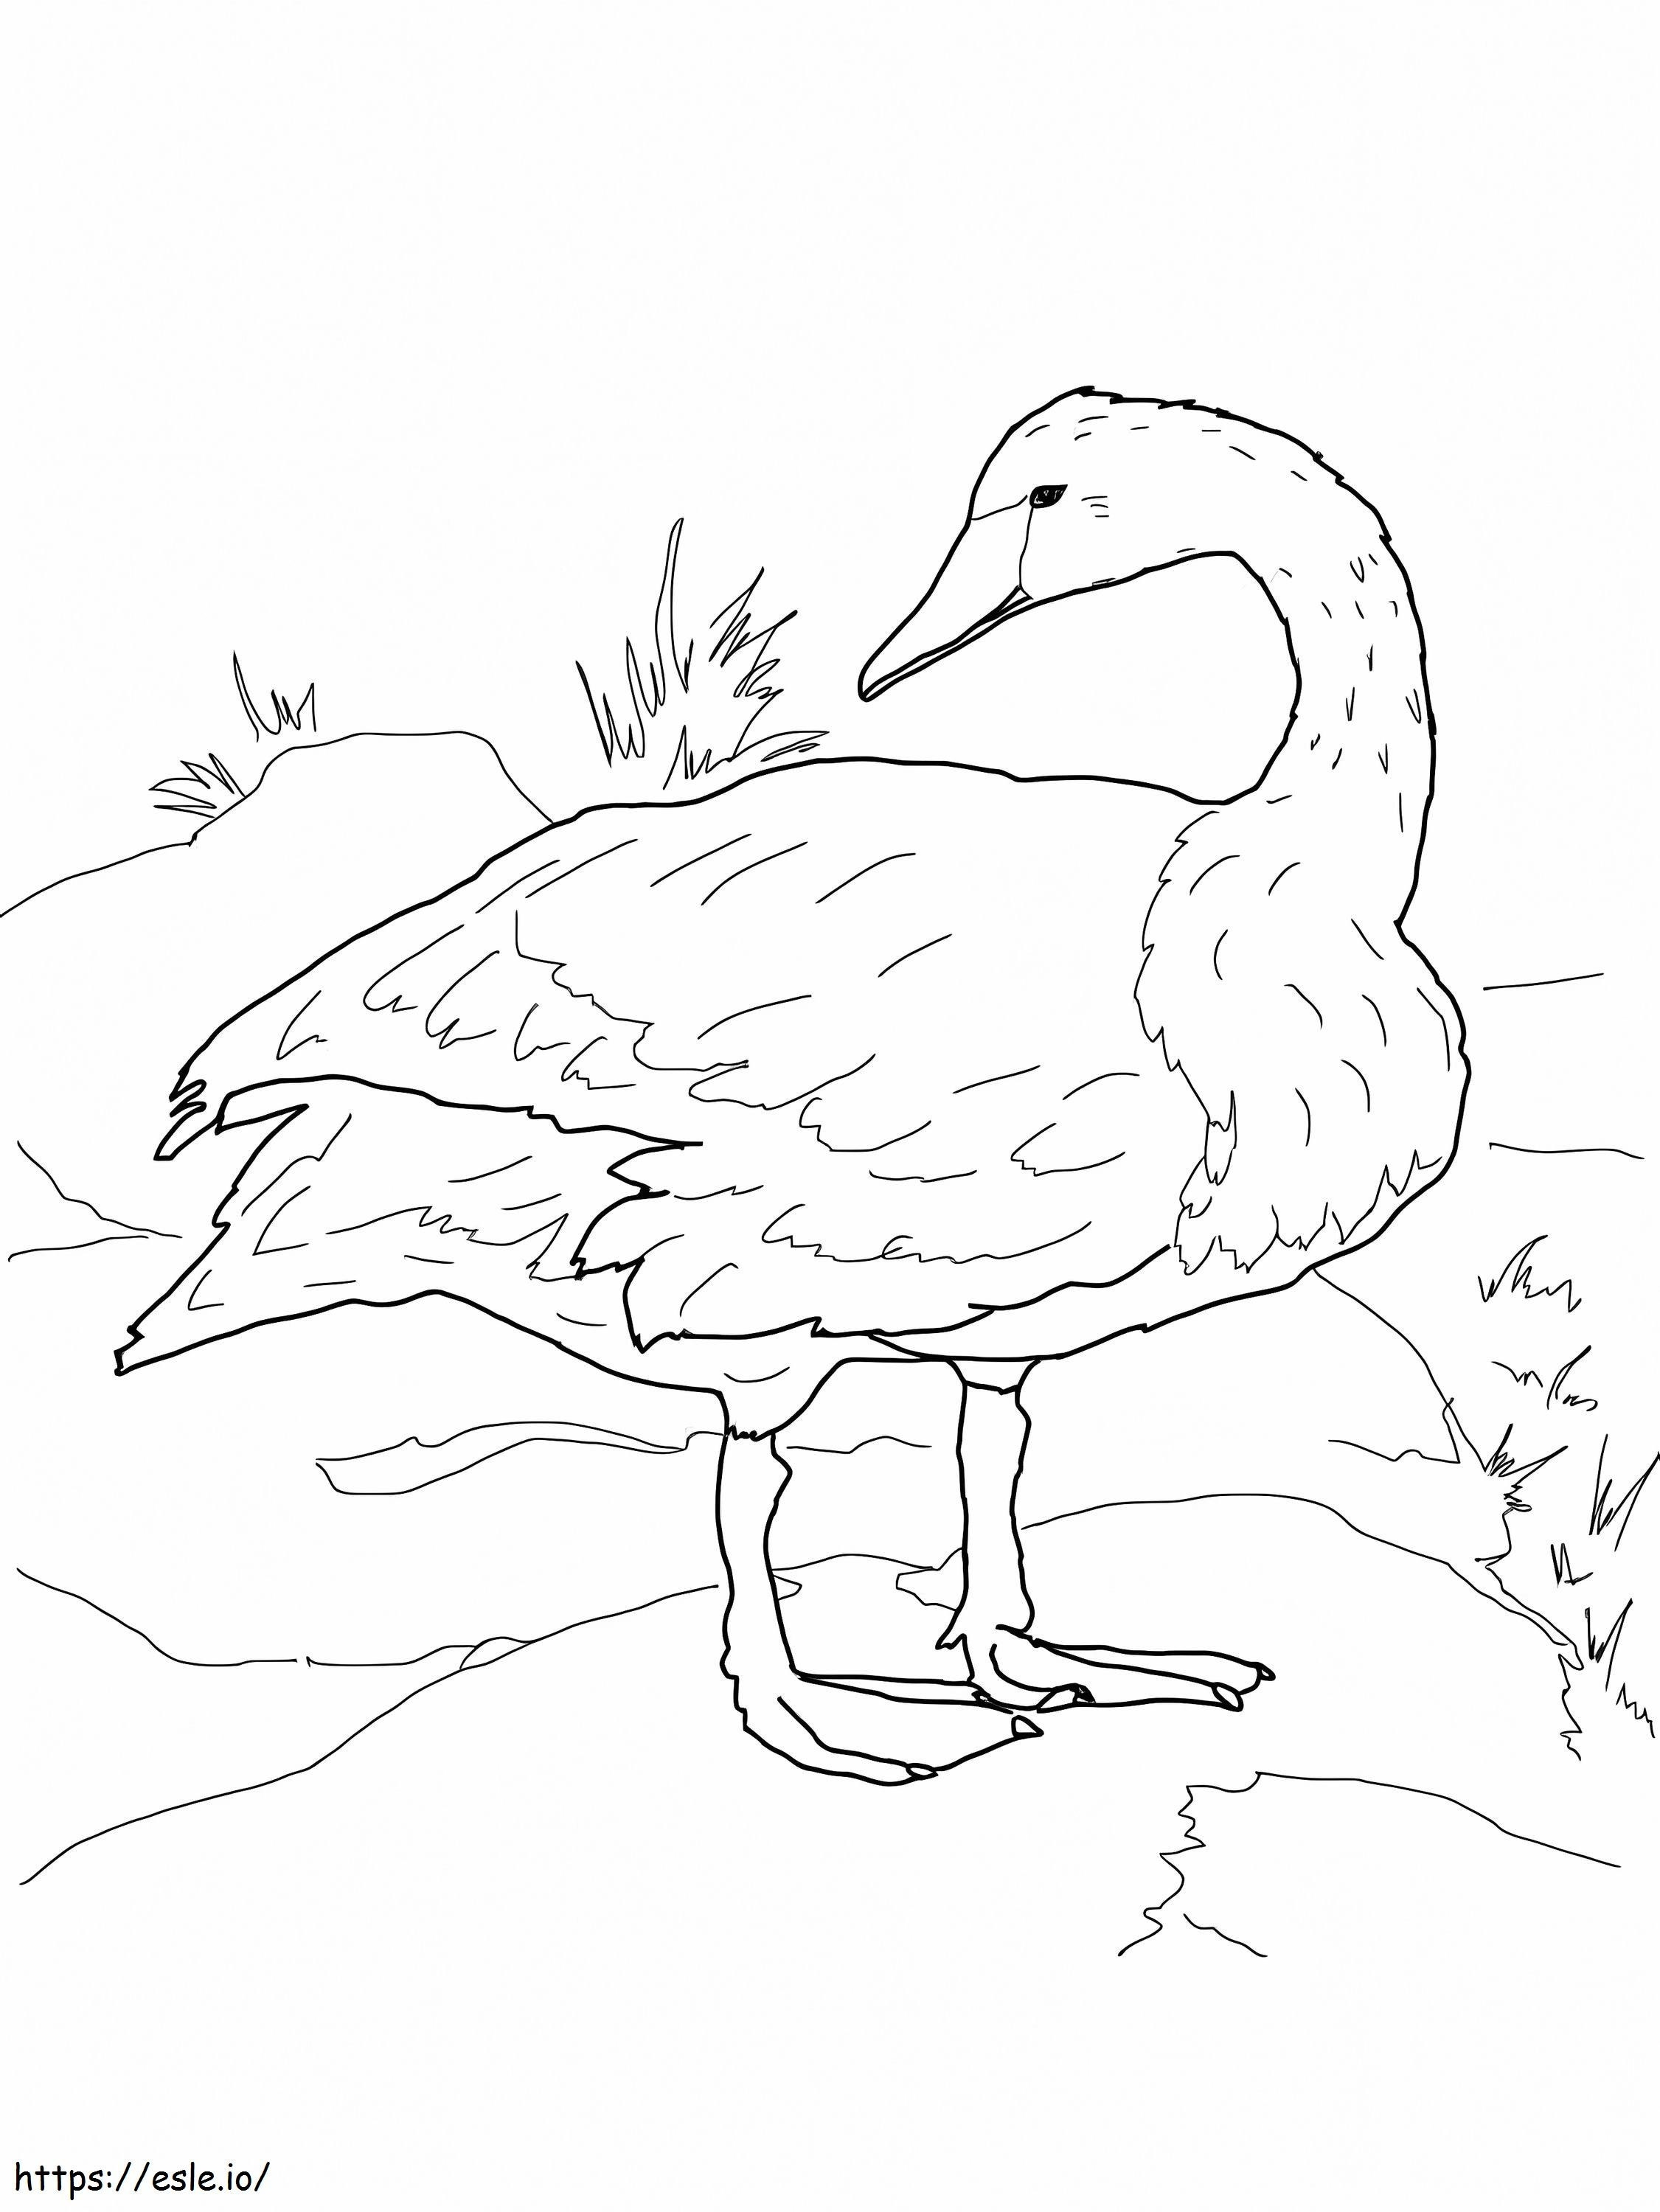 Trumpeter Swan On The Shore coloring page